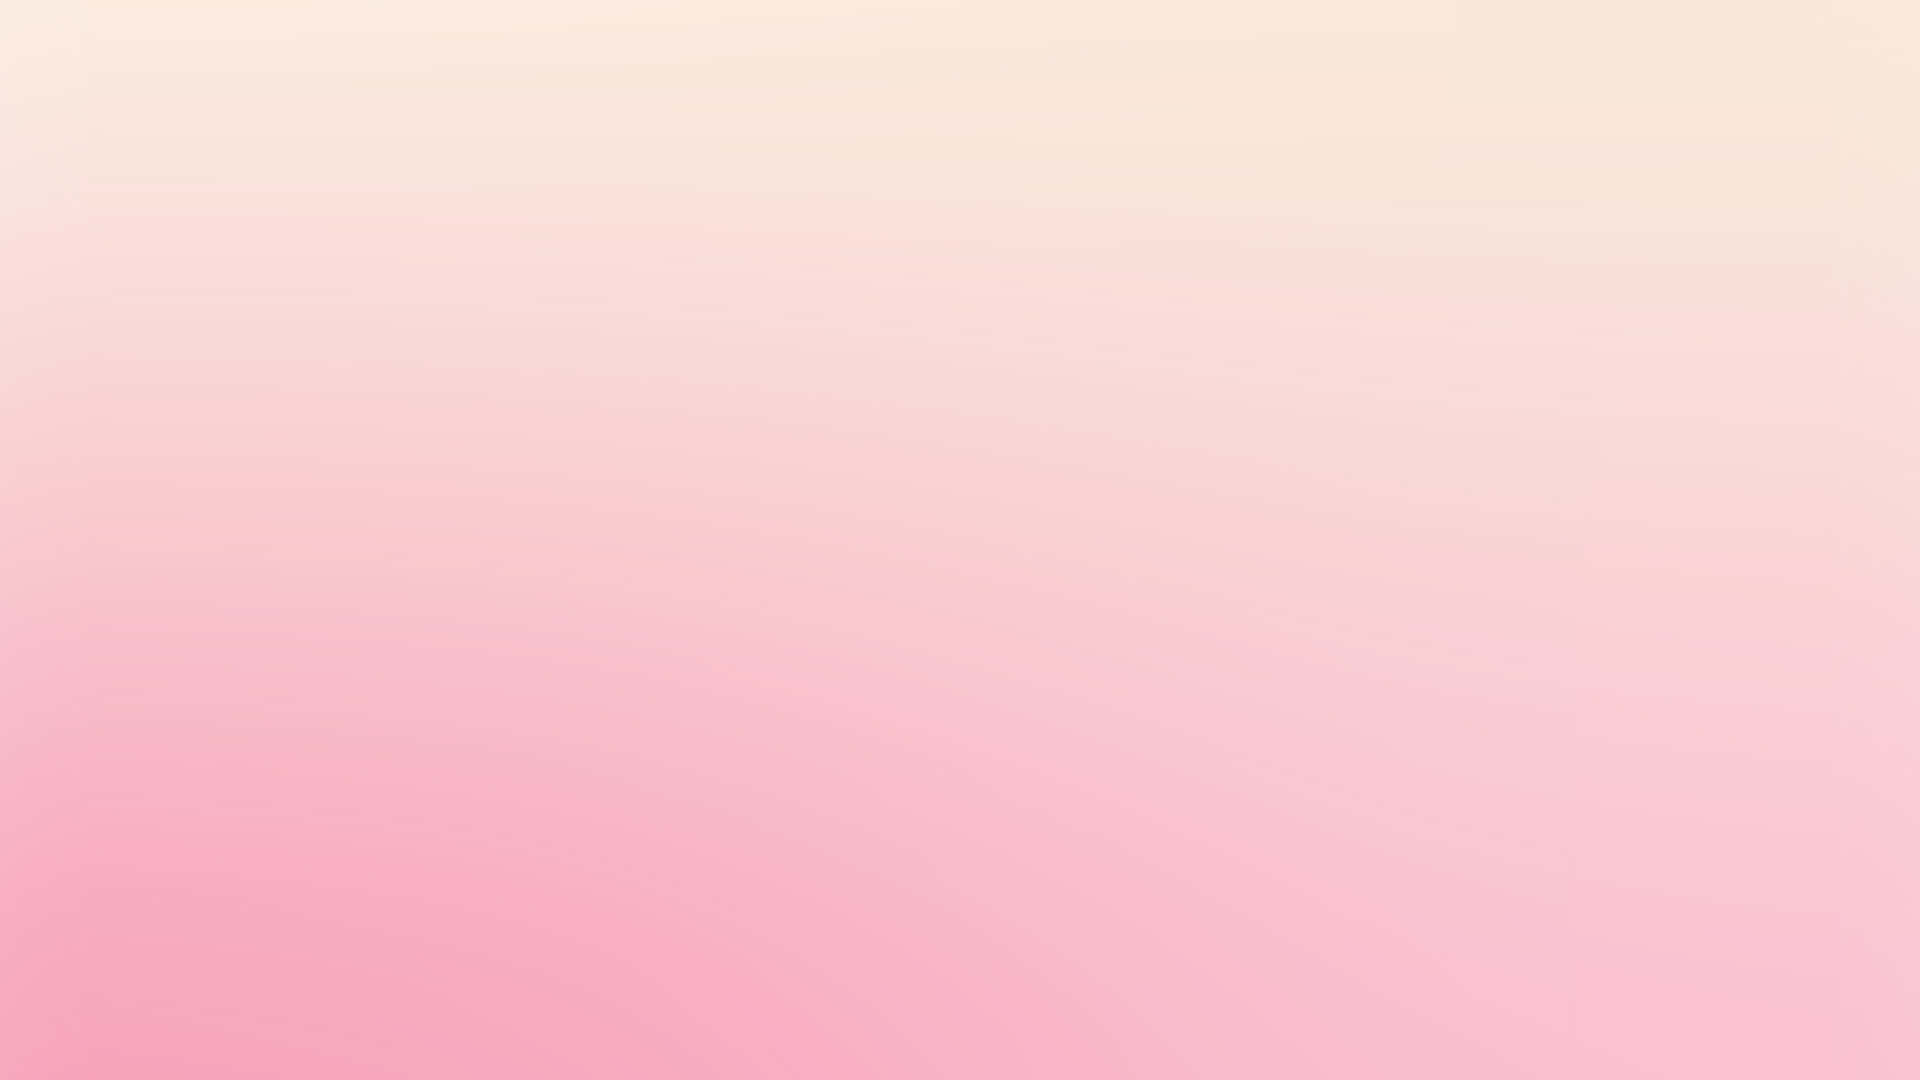 Brighten Up Your Day With This Happy Pink Background